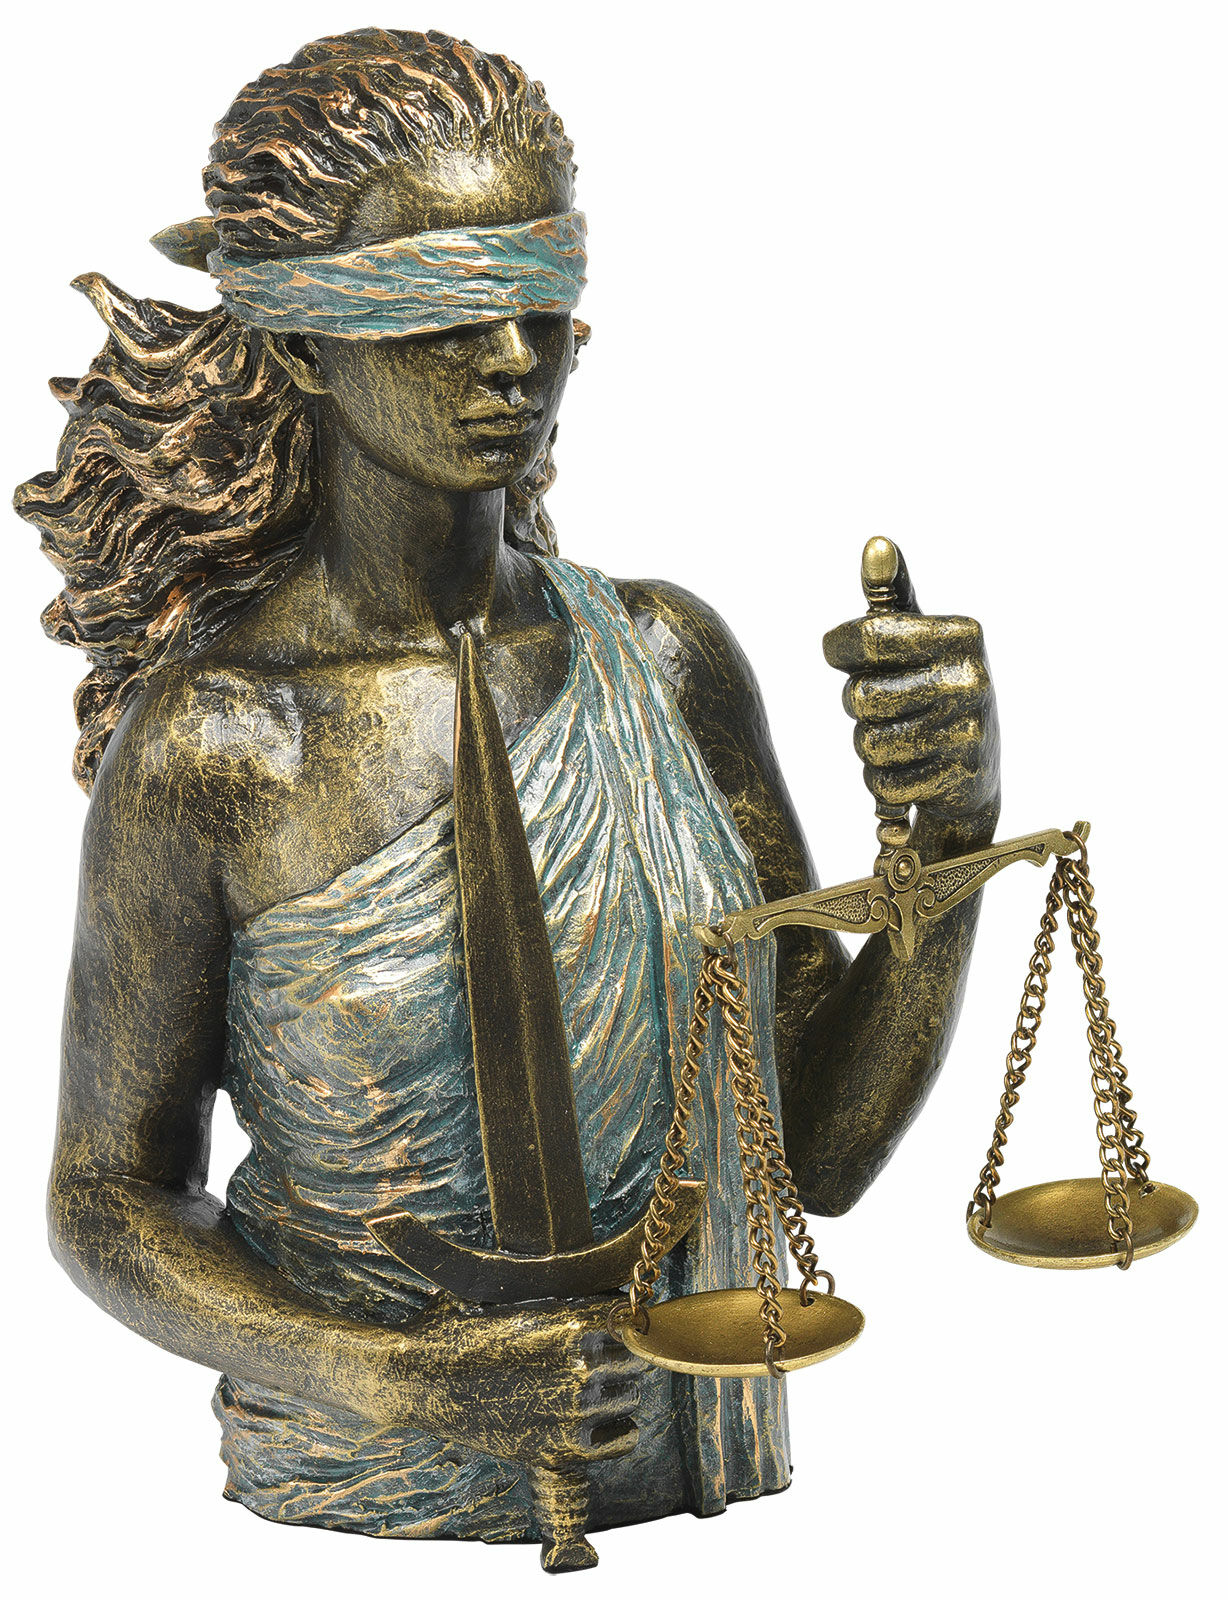 Sculpture "Lady Justice", artificial stone by Angeles Anglada